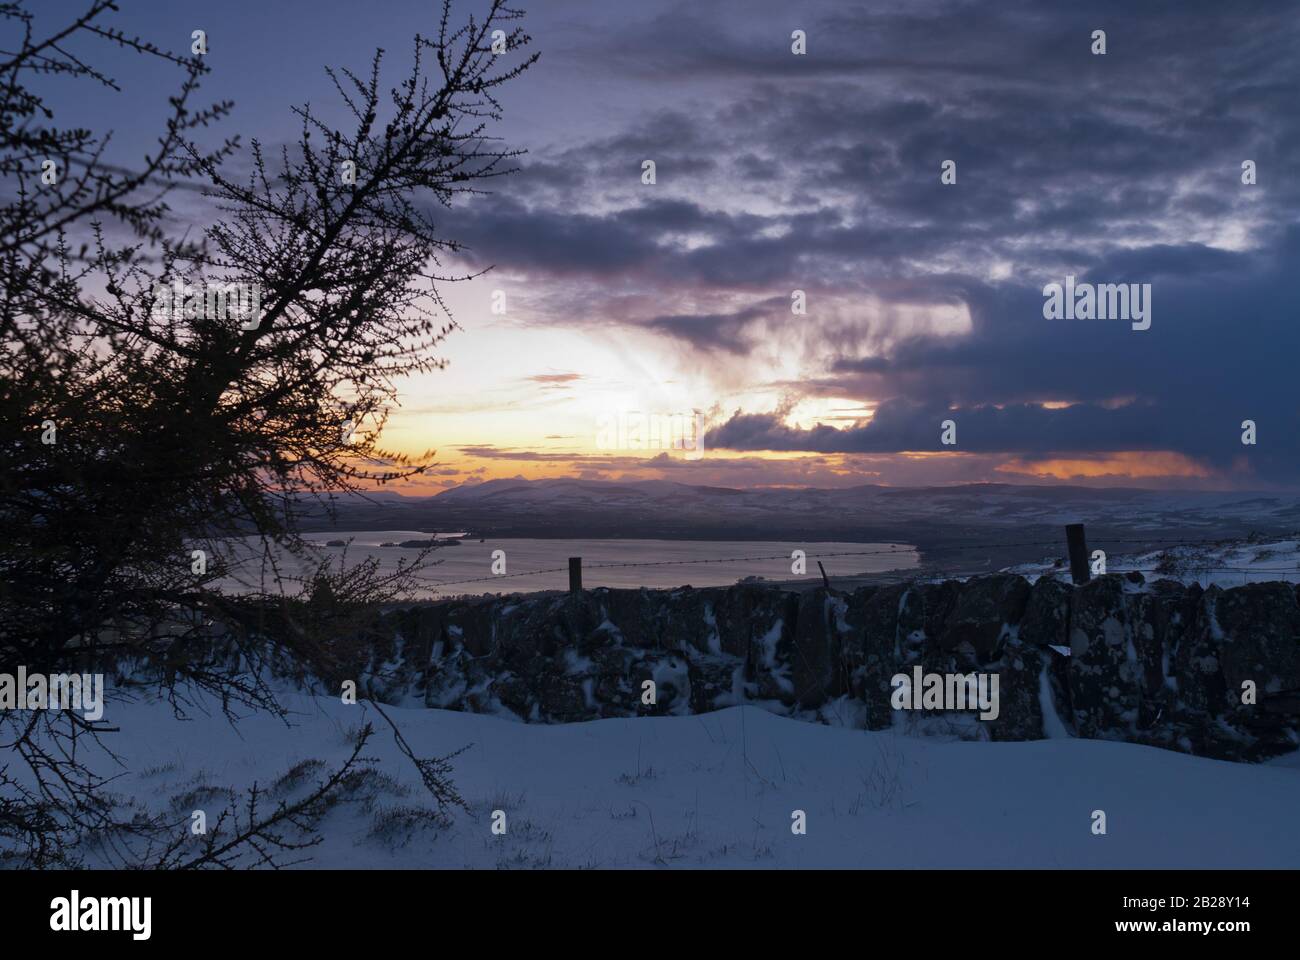 A winter sunset scene from the Lomond Hills of Fife, overlooking Loch Leven, Kinross-shire. Stock Photo